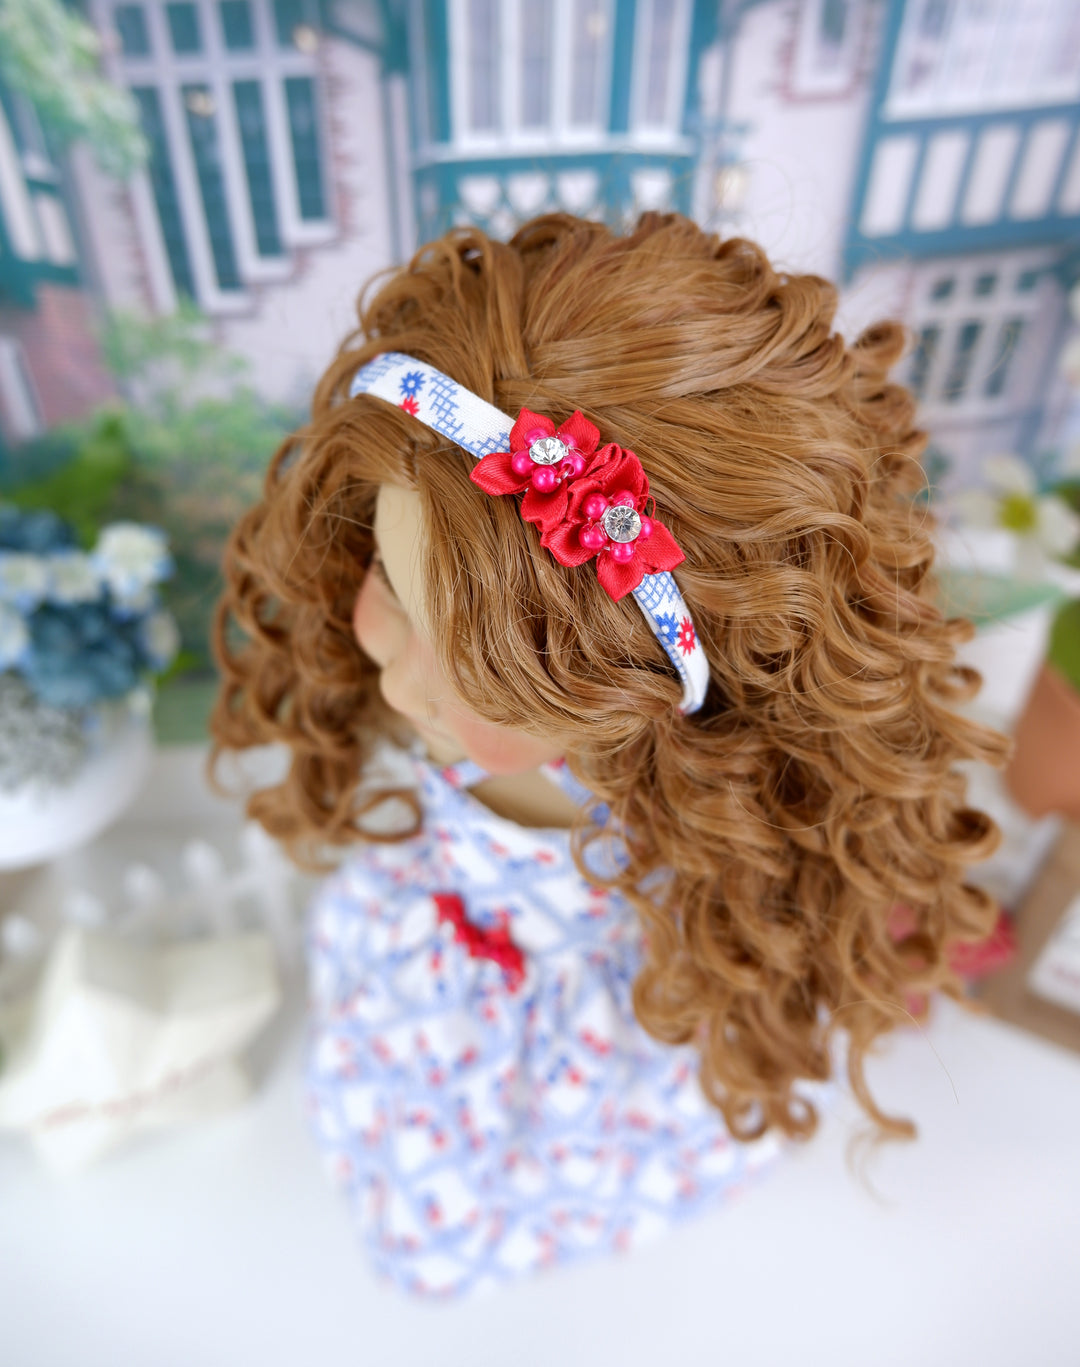 American Posy - dress with shoes for Ruby Red Fashion Friends doll